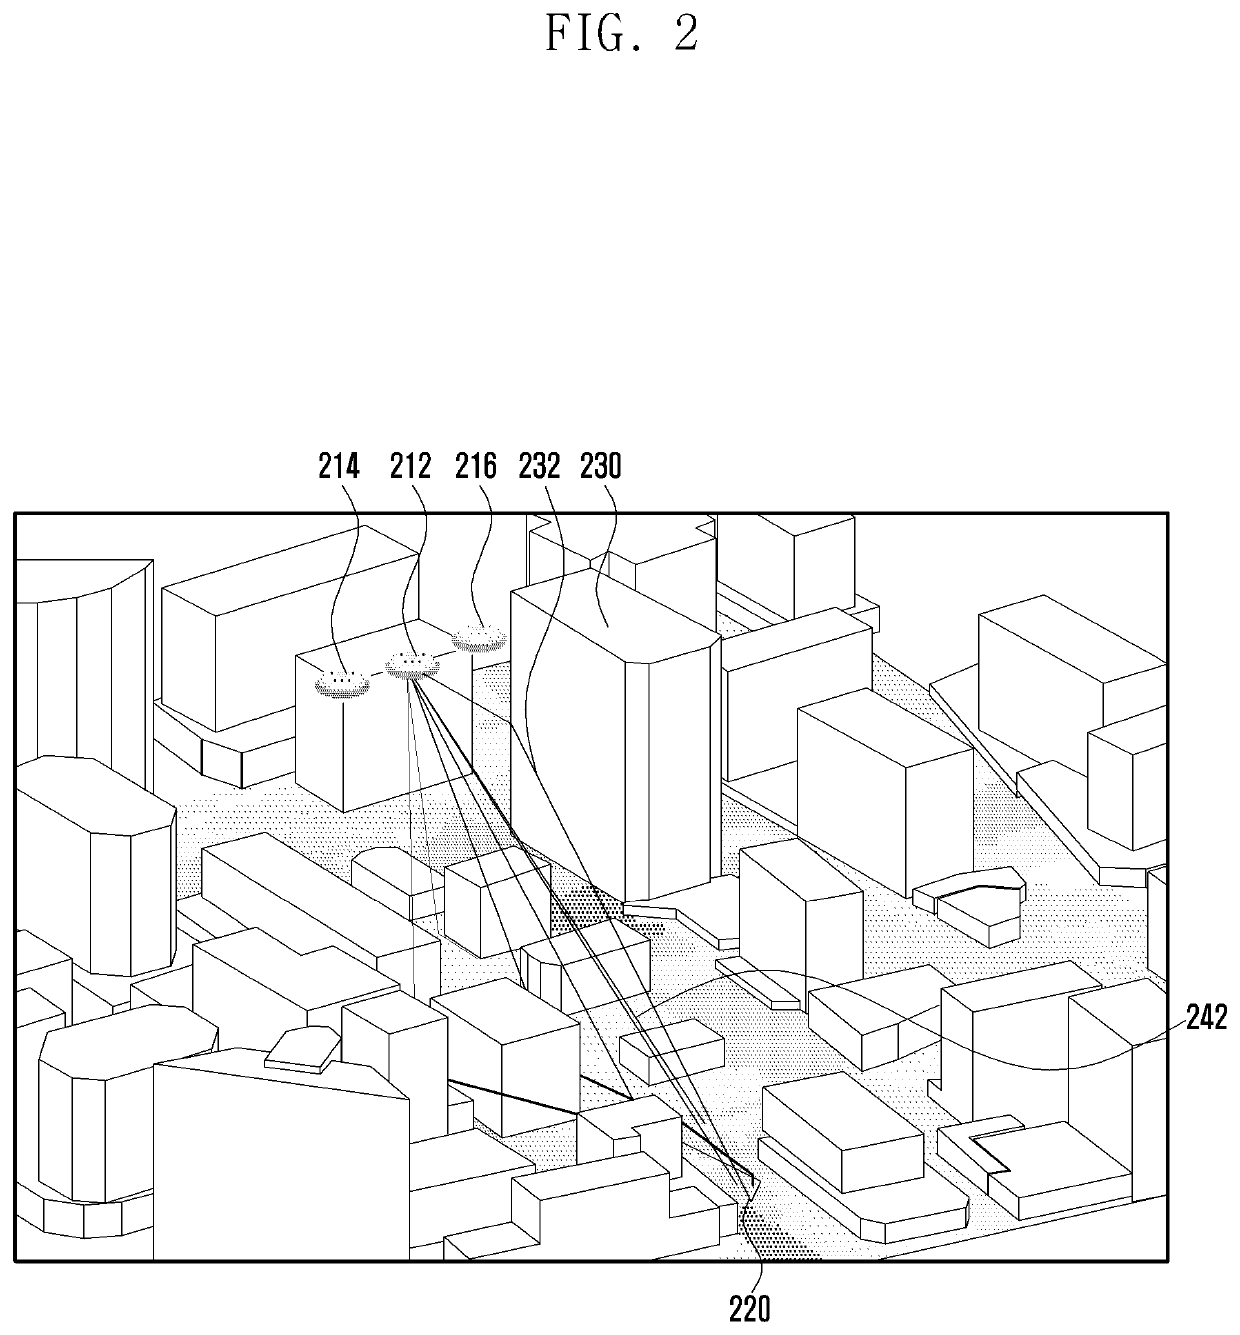 Method and device for analyzing communication channels and designing wireless networks, in consideration of information relating to real environments